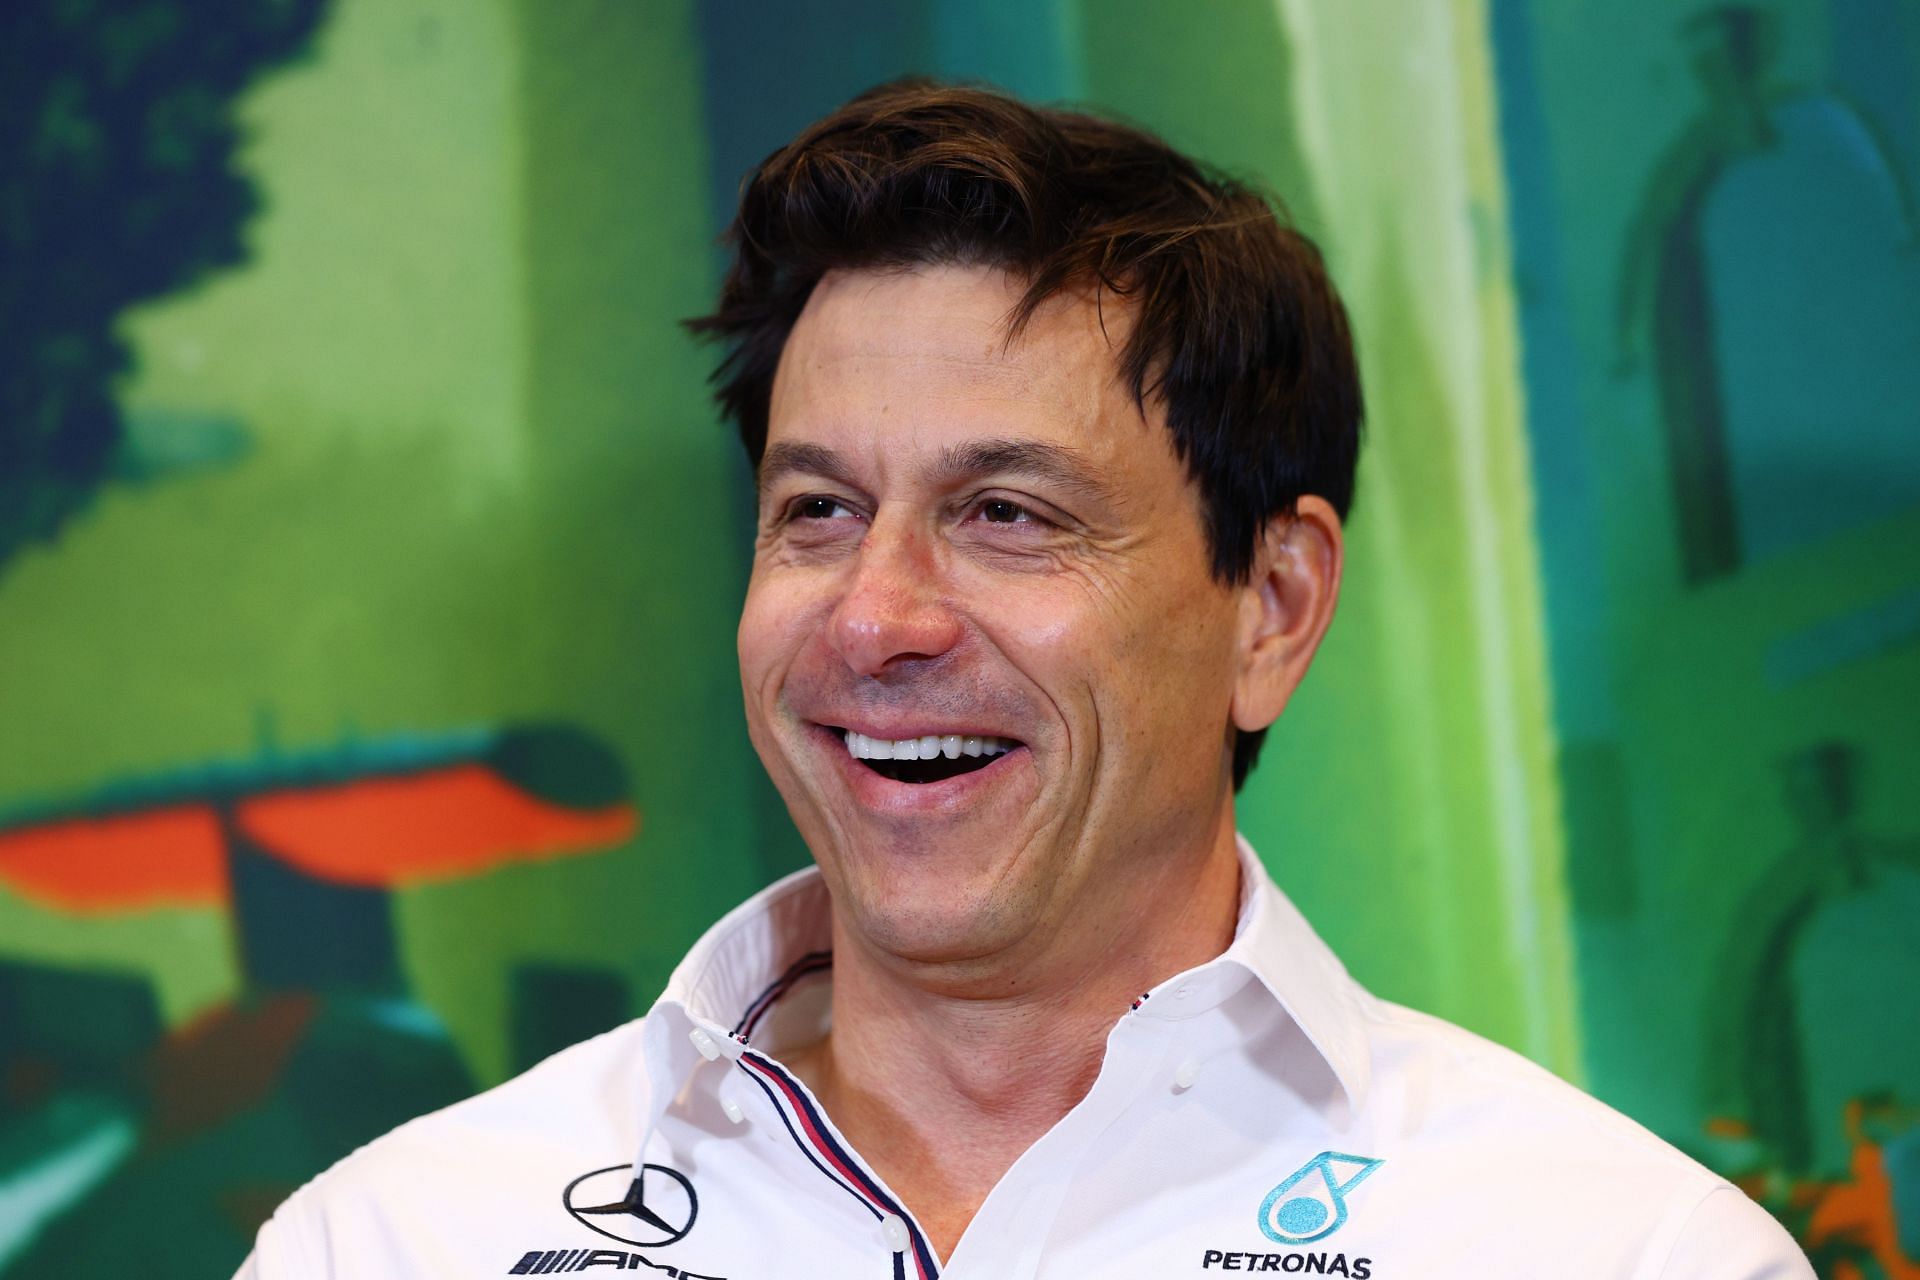 Mercedes GP Executive Director Toto Wolff looks on in the Team Principals Press Conference prior to final practice ahead of the 2022 Azerbaijan GP. (Photo by Clive Rose/Getty Images)